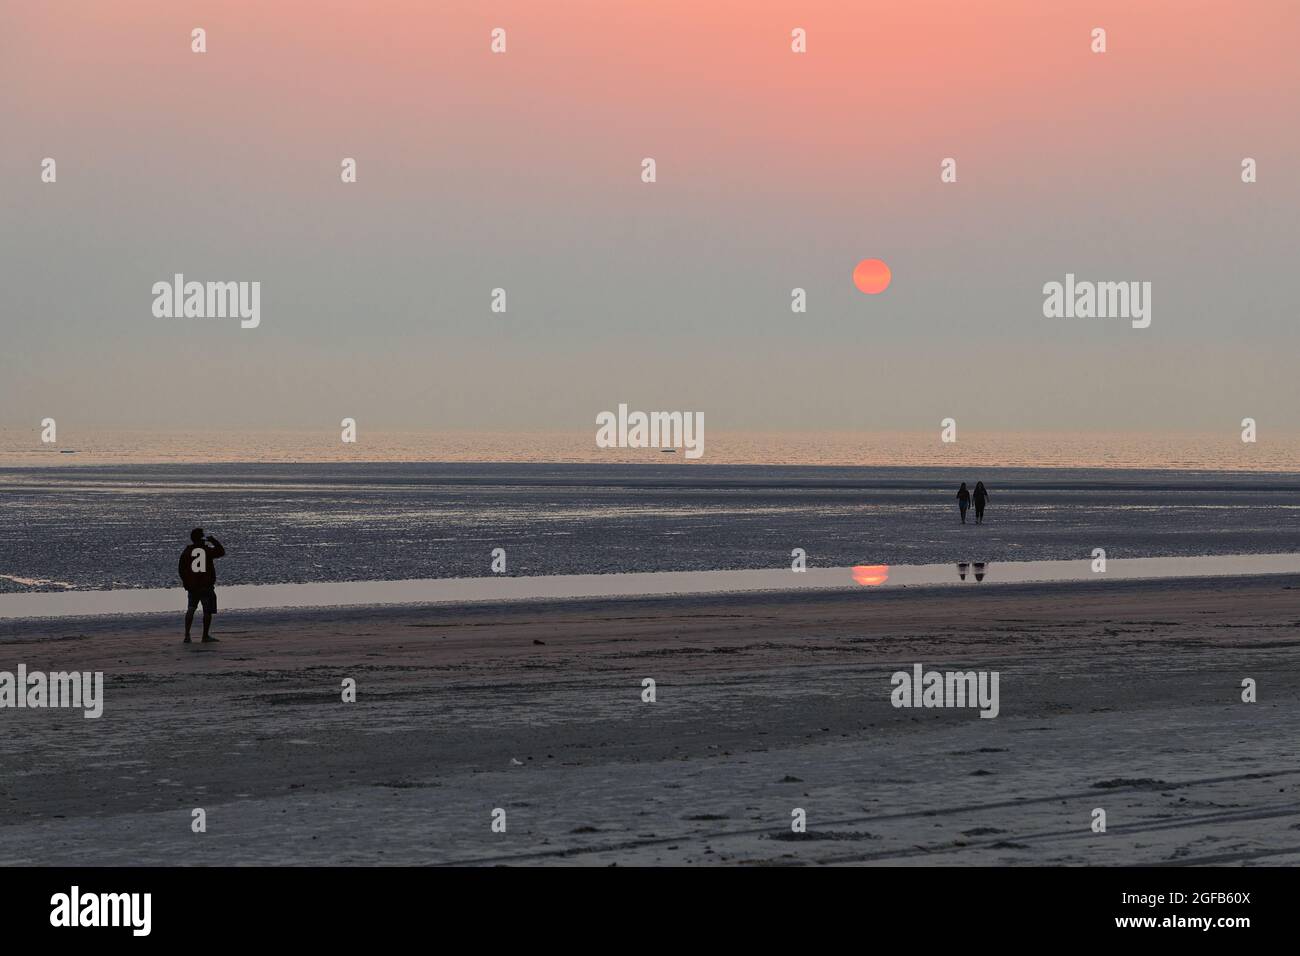 Picture of a loan sea beach at the time of sunset  minimalist outdoor landscape travel photography Stock Photo